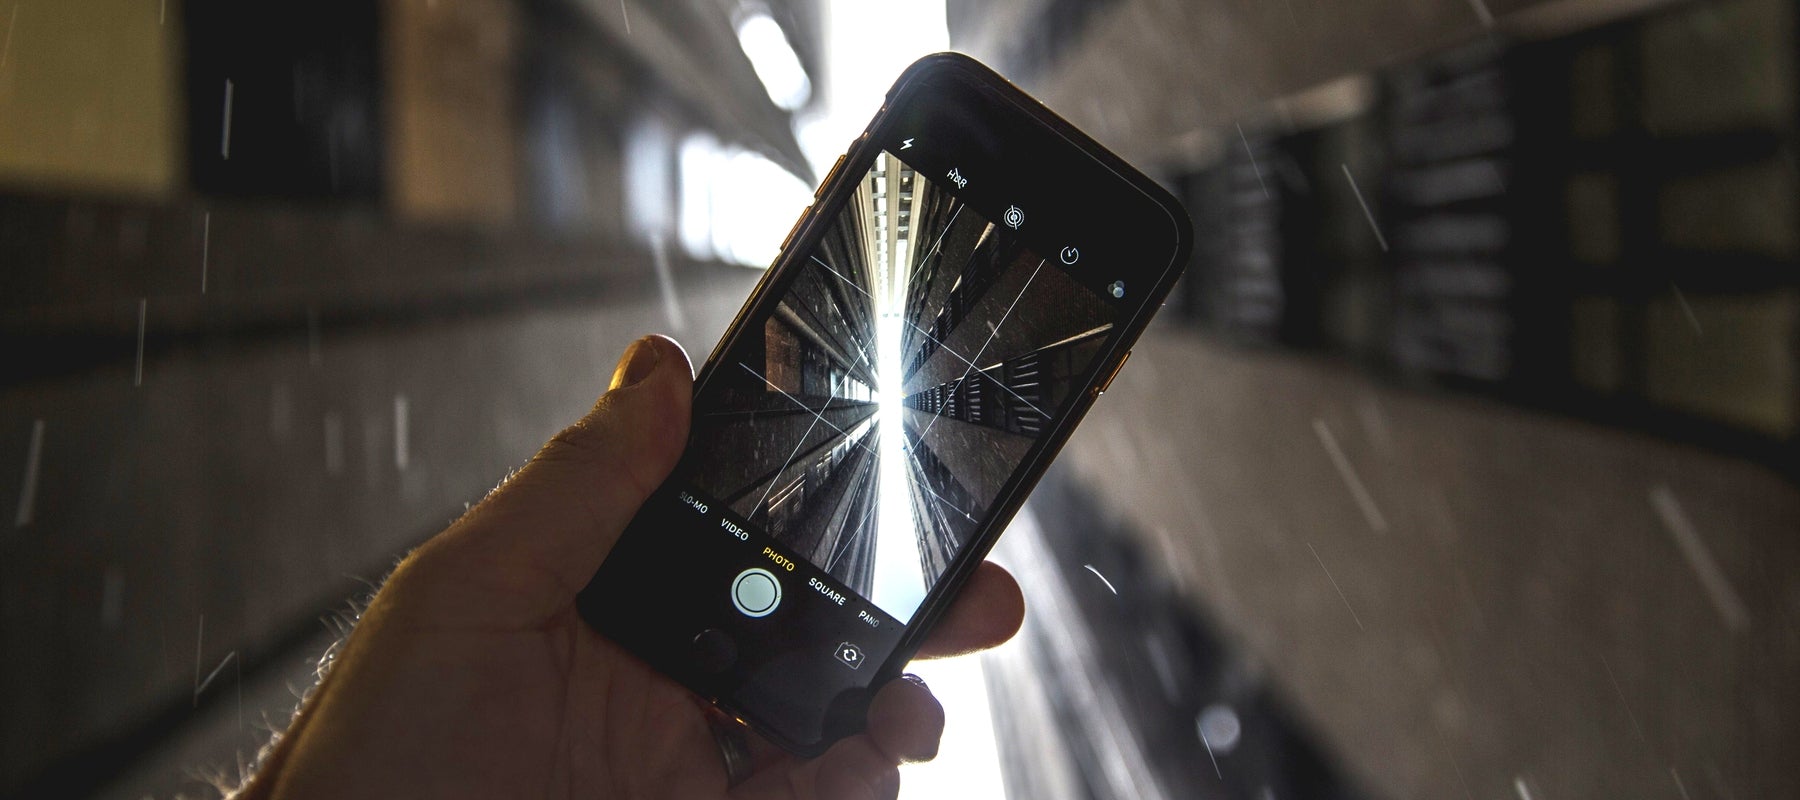 4K Video - iPhone Seen Brighter Days? We Can Help!  (Just like this...) - Signa